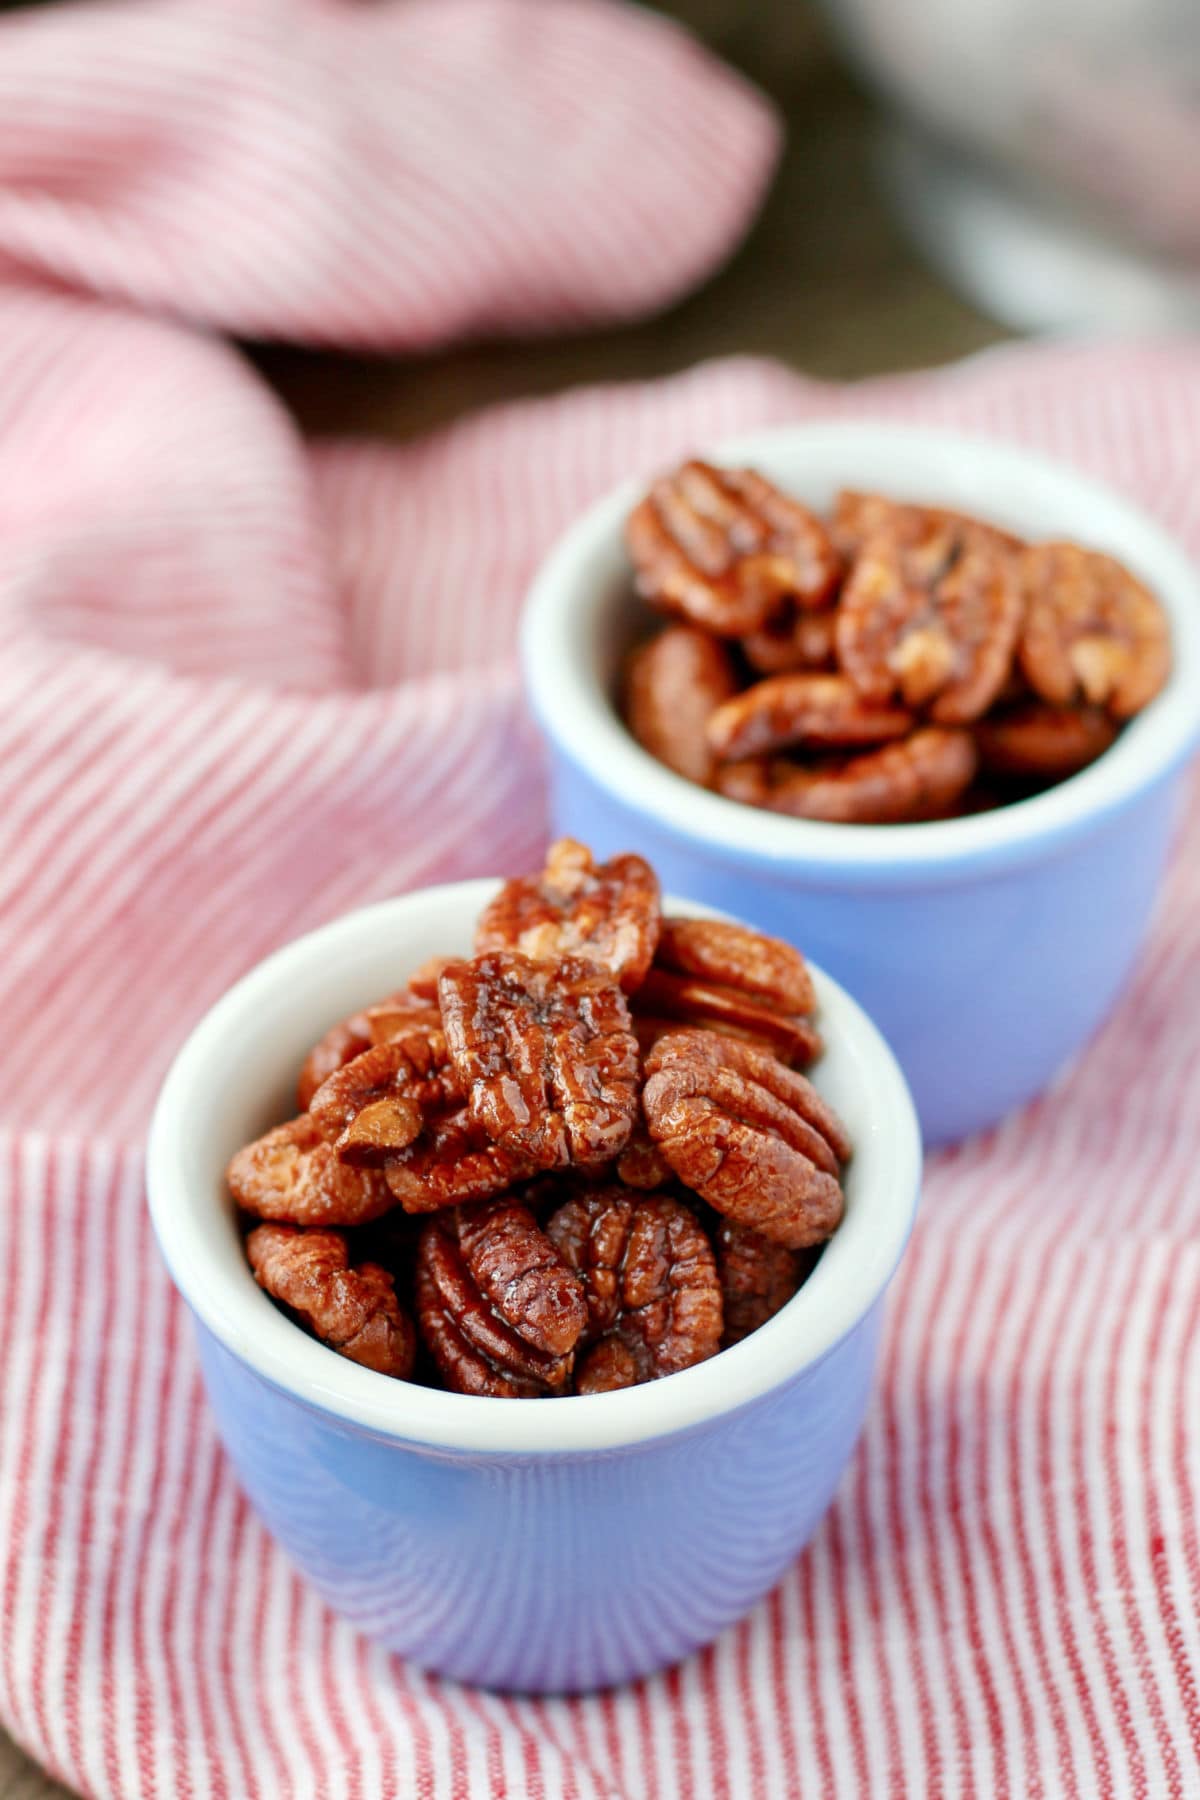 Candied pecans in little bowls